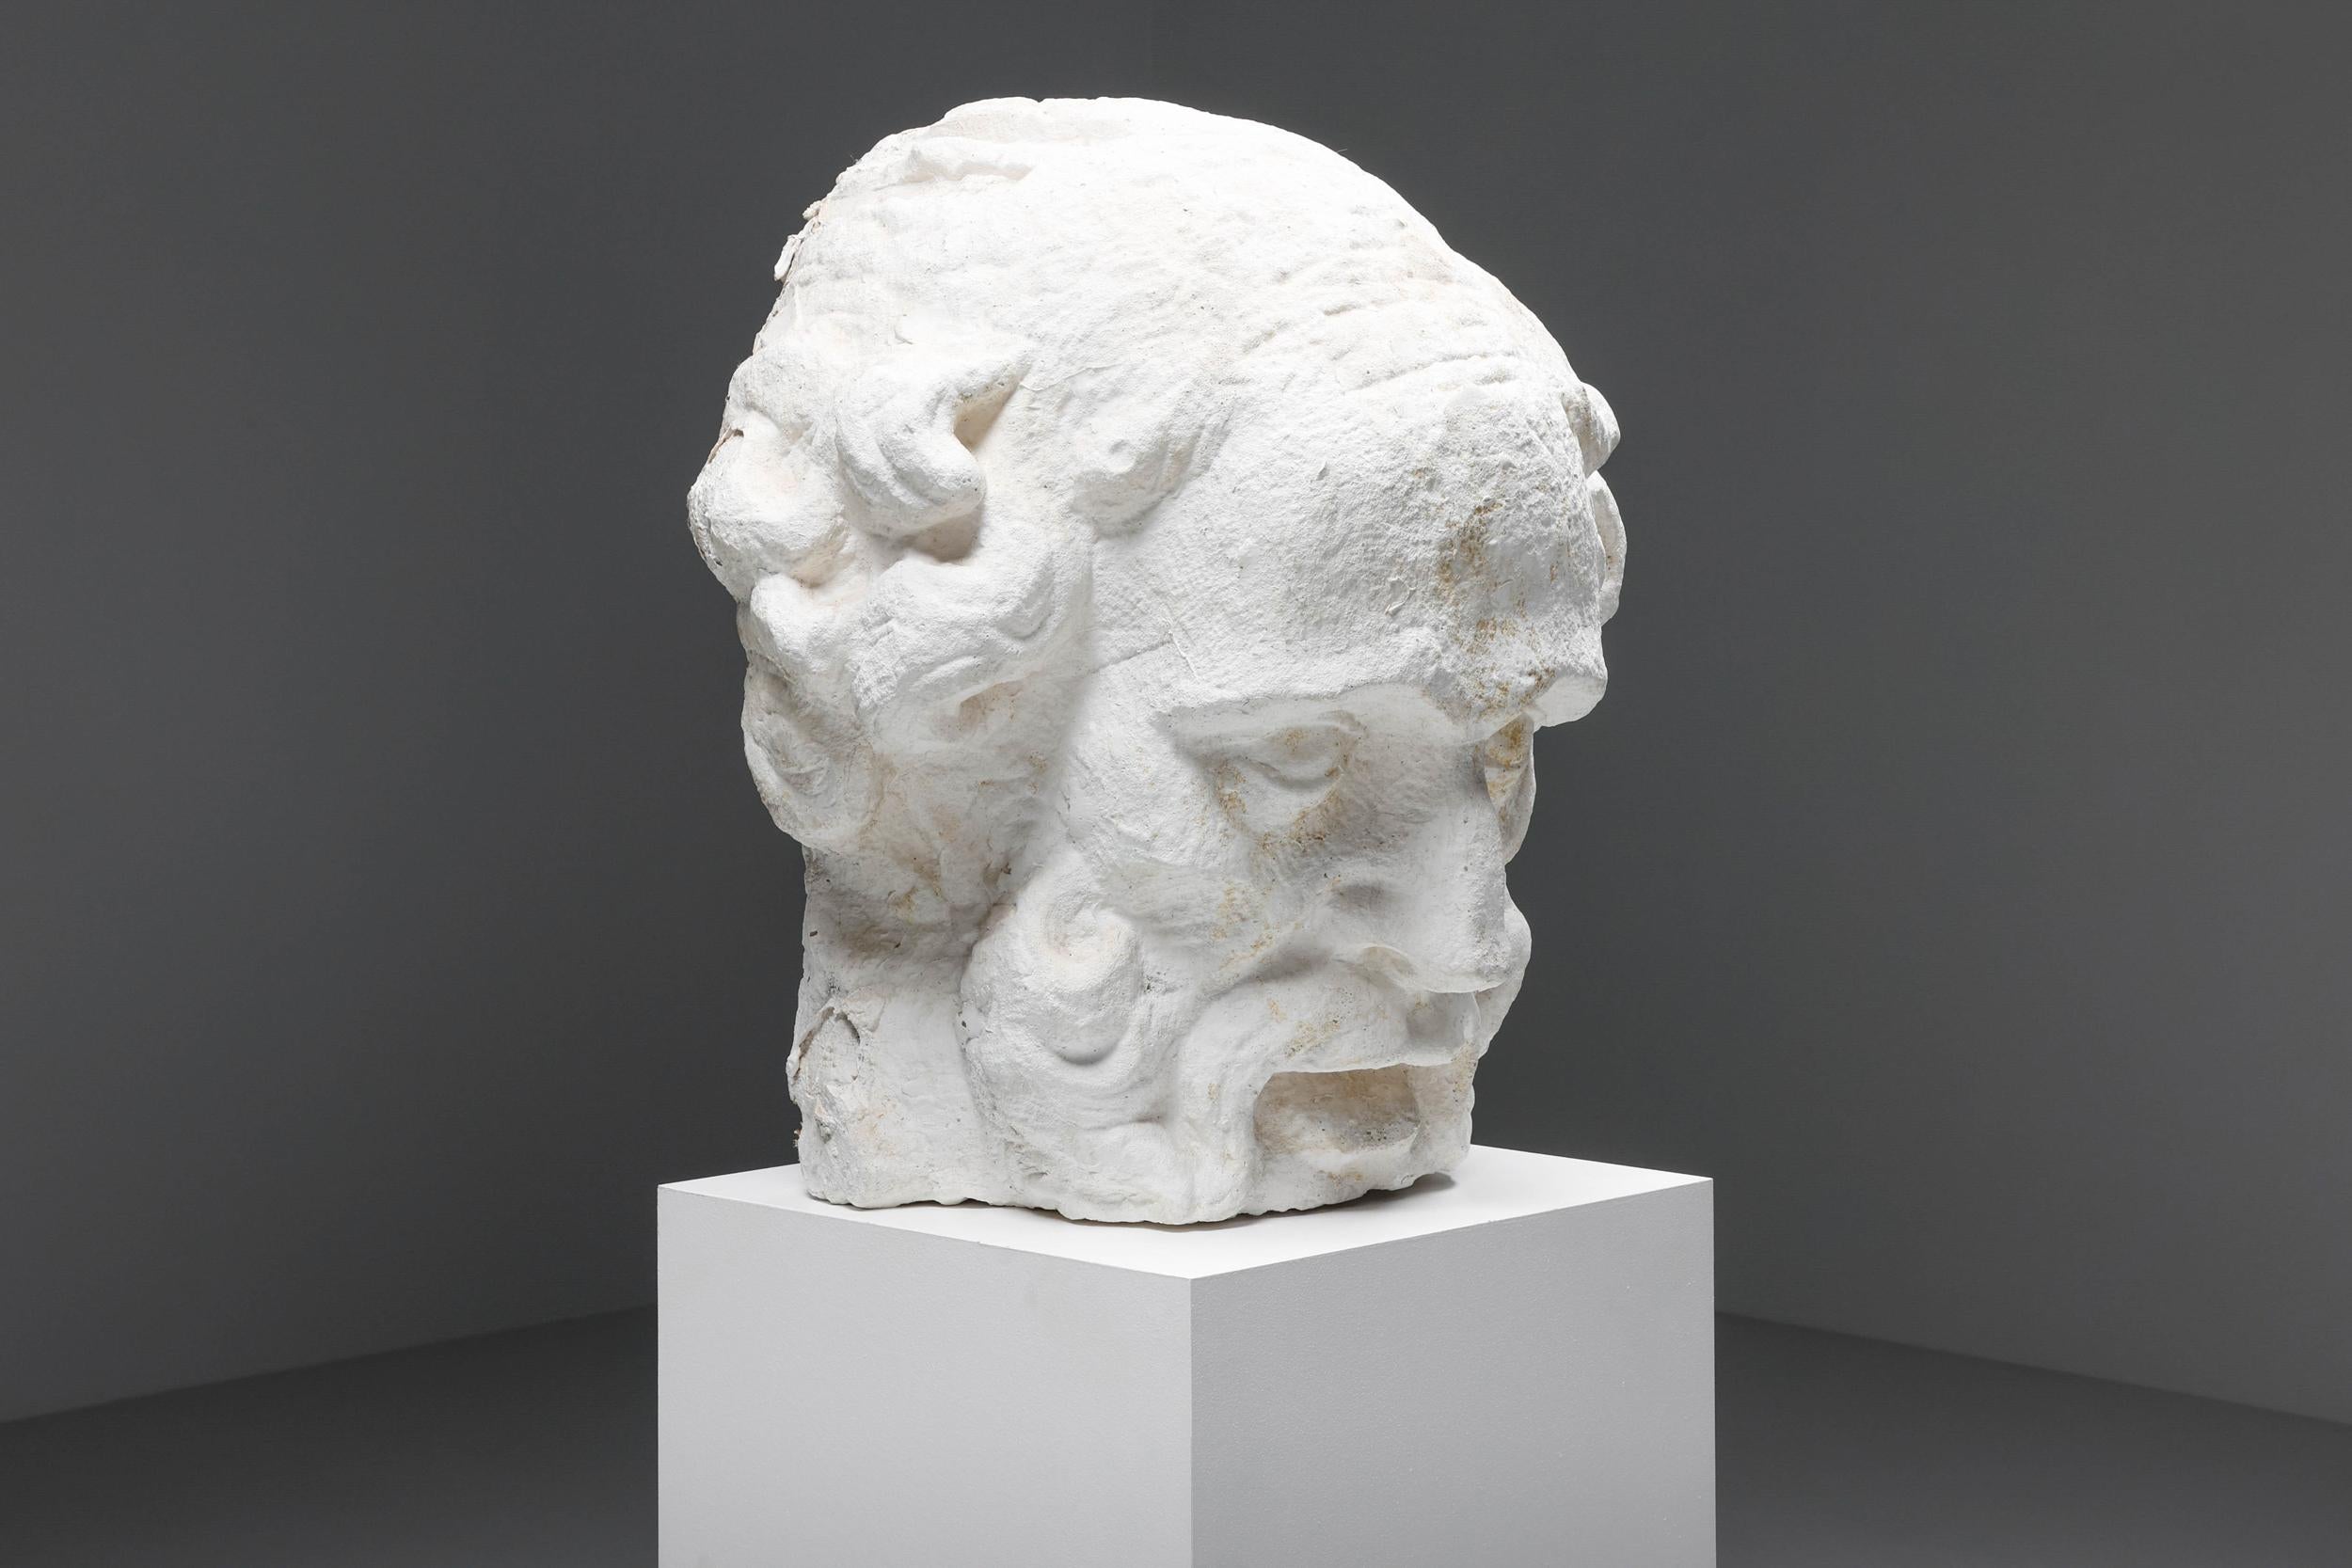 Classical Greek; Belgian sculpture; Plaster sculpture; Belgian art; 19th century; 

Classical plaster head sculpture sourced from a Belgian church. This artwork dates back to the 19th century and was inspired by classical Greek sculpture methods.